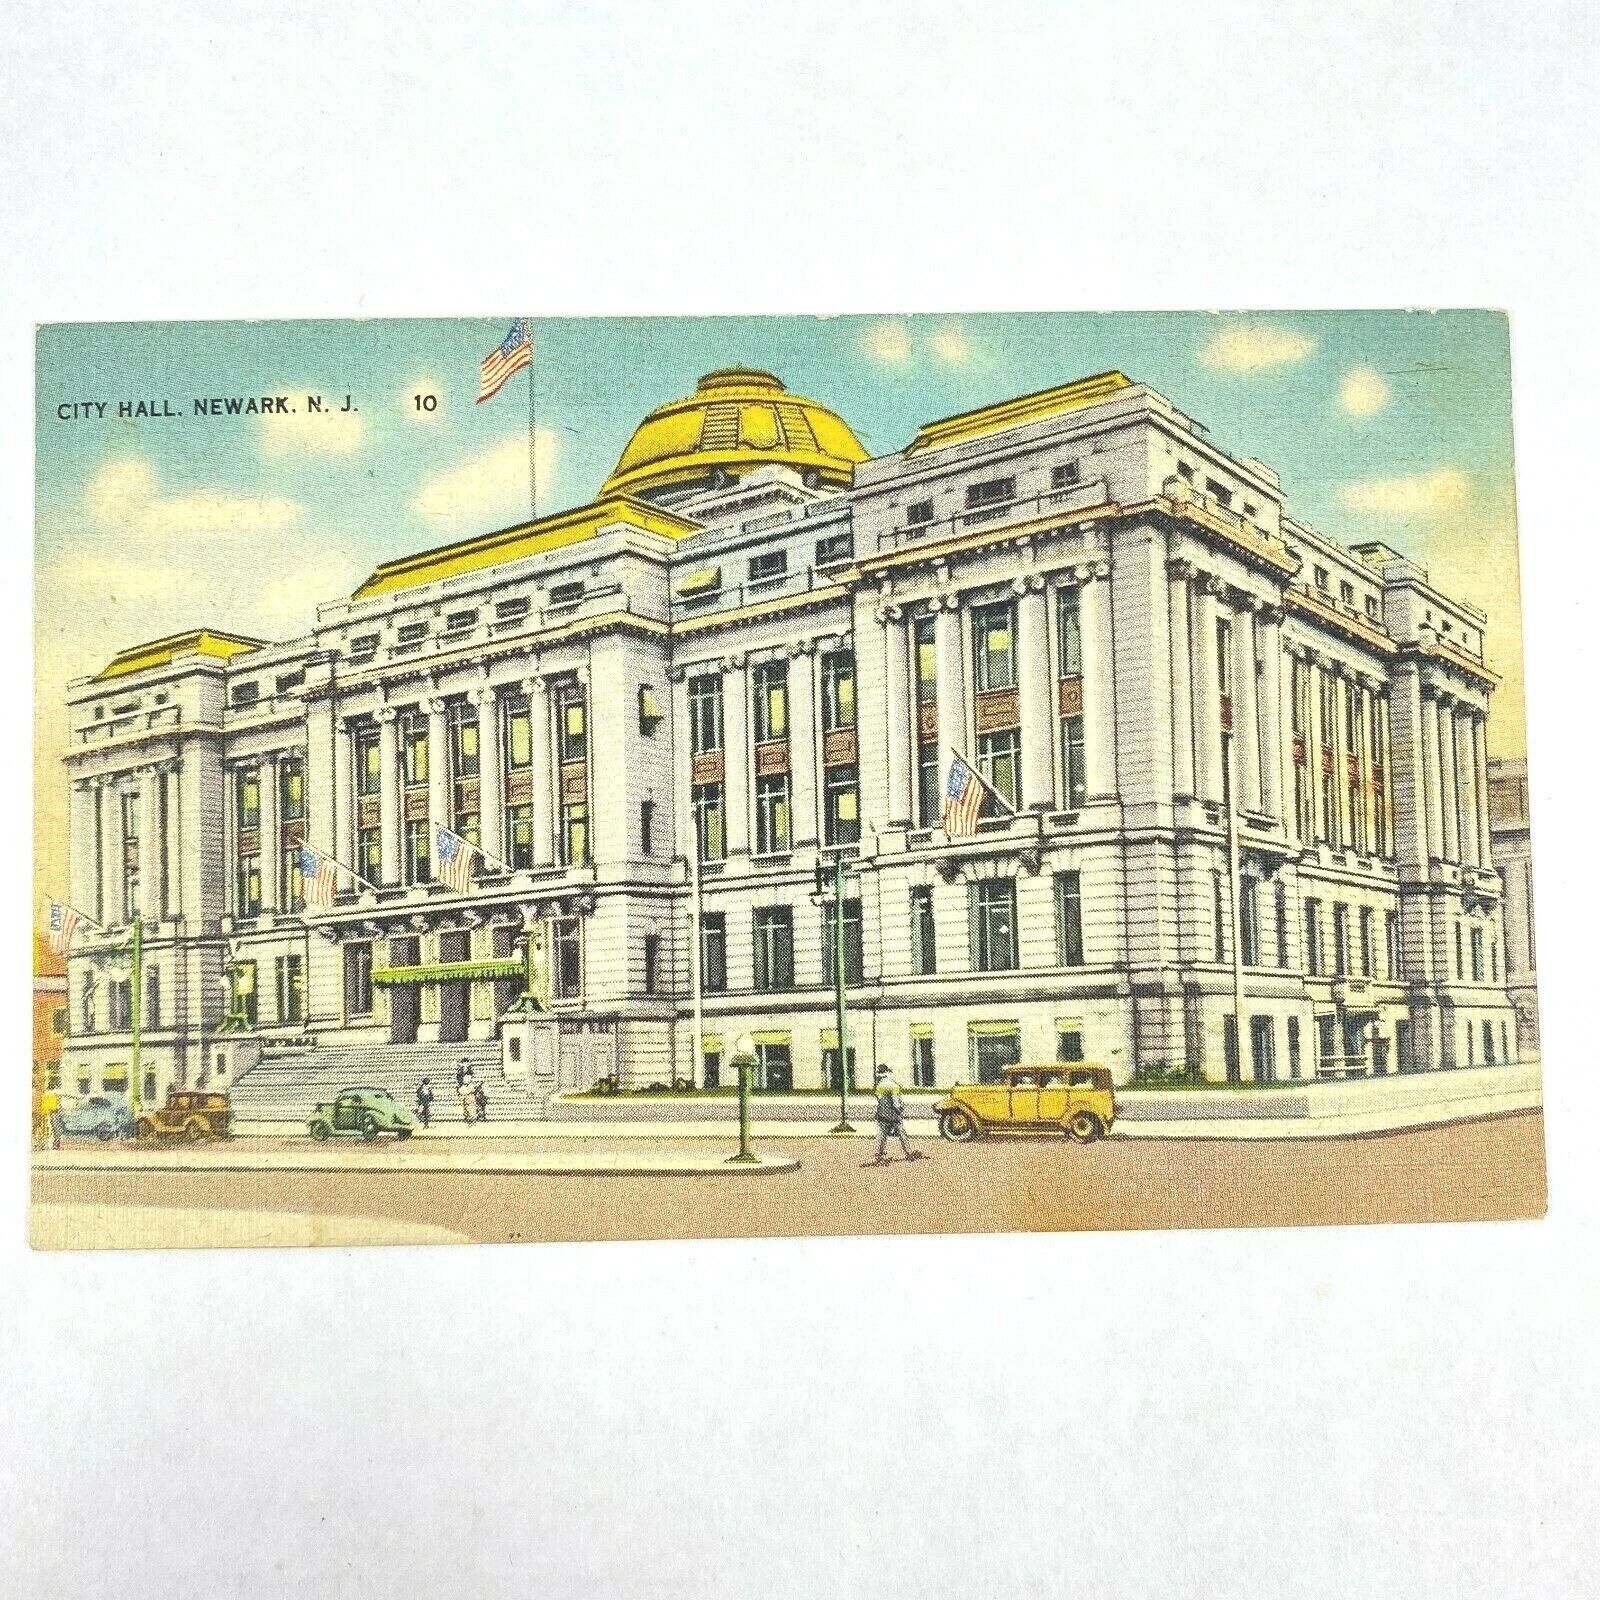 Vintage Newark Postcard Newark New Jersey City Hall Building USA Posted Stamped